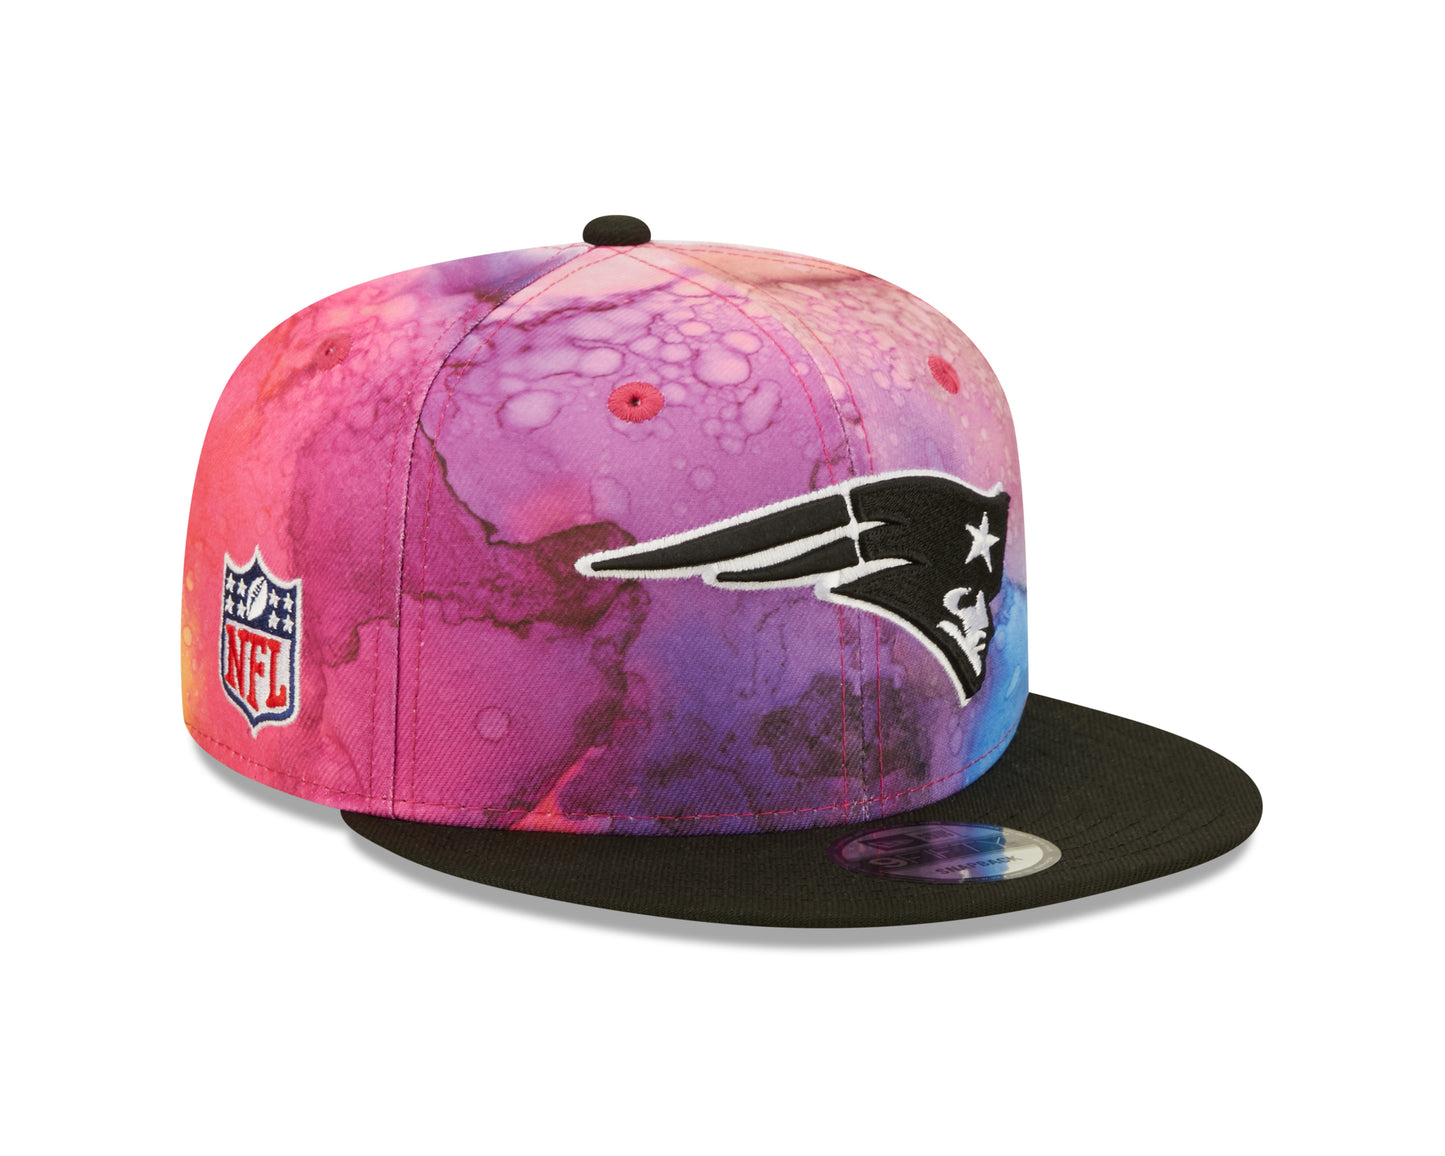 New England Patriots New Era Sideline Crucial Catch 9Fifty Hat- Ink Pink